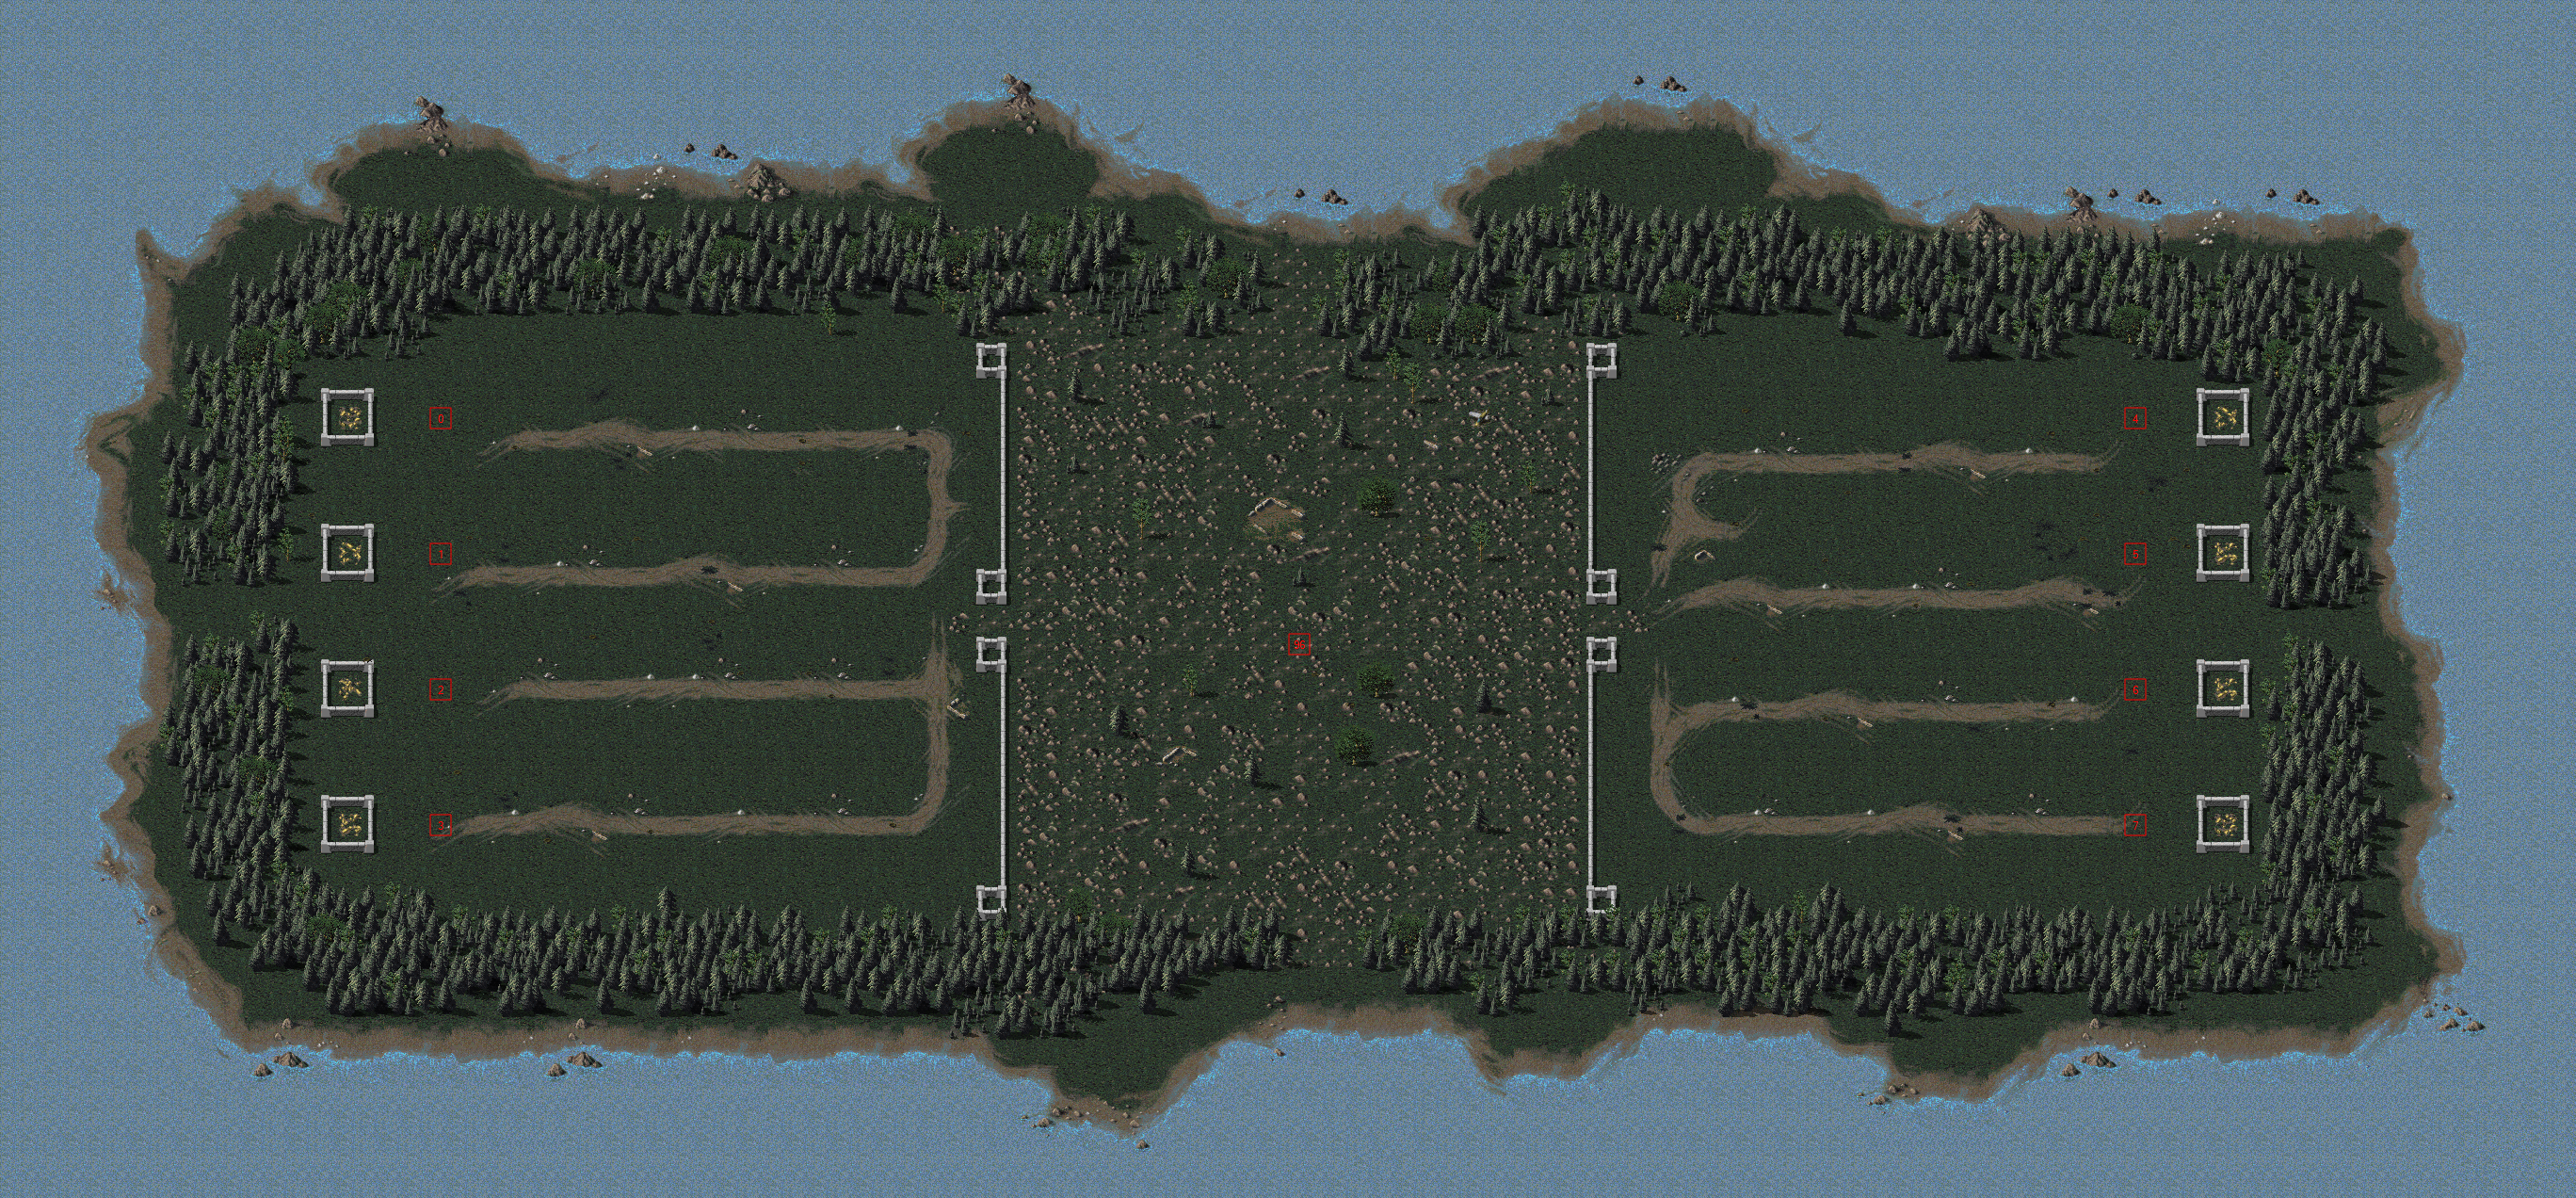 Forest_Island.png.8a2464fd887959747f77975c959768c7.png